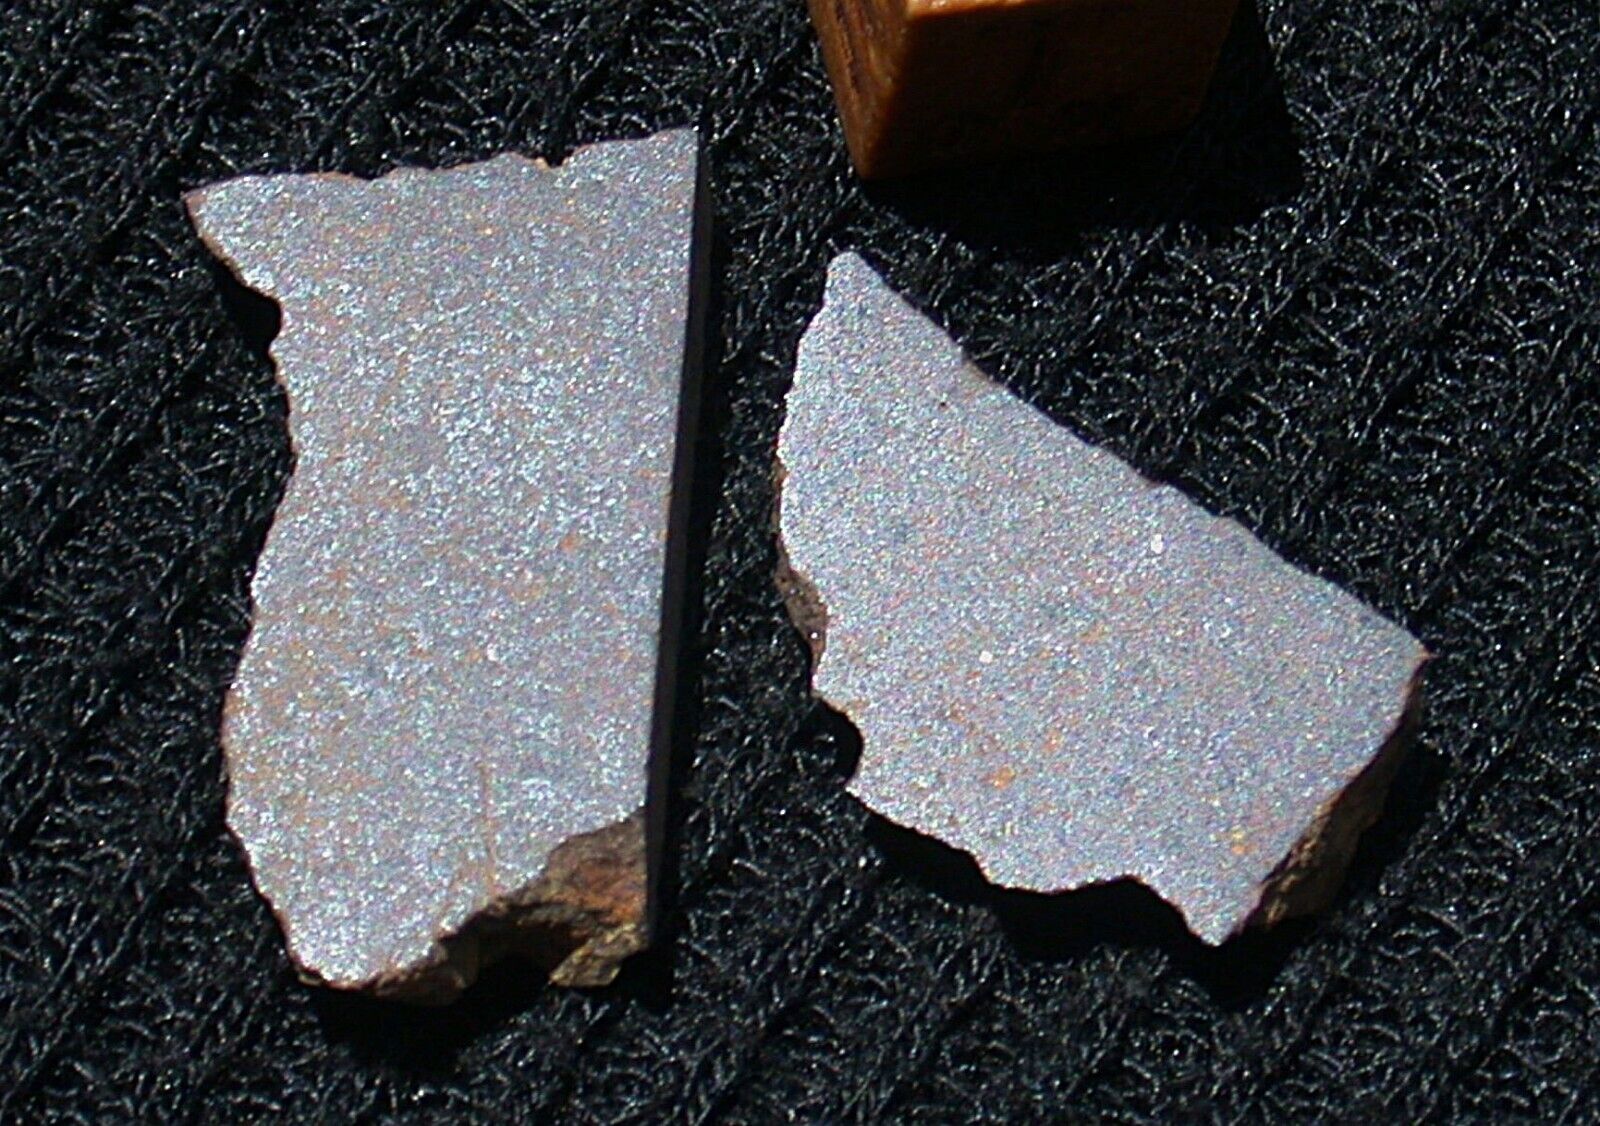 NWA 15122 (H4) - Lot of 2 (5 g) meteorite part slices (Awesome Metals)